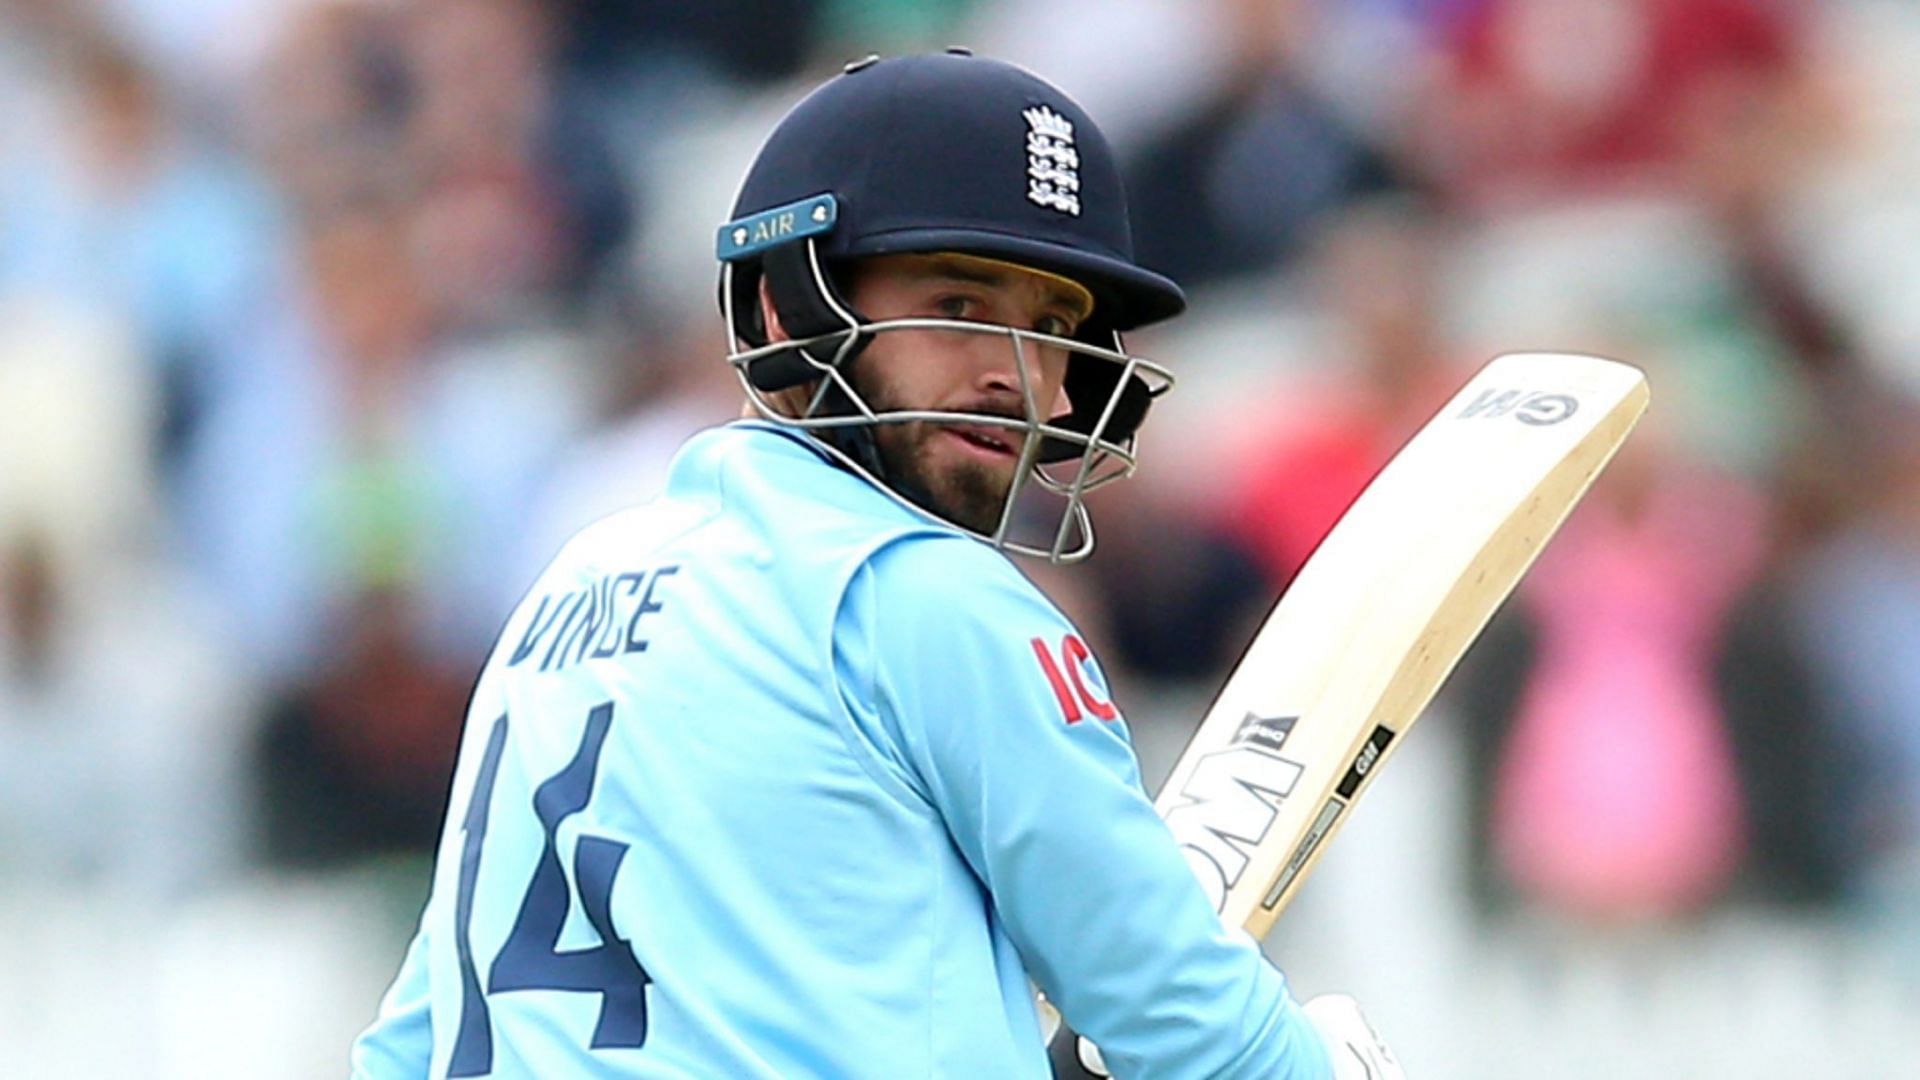 James Vince has predominantly been a fringe player for England.